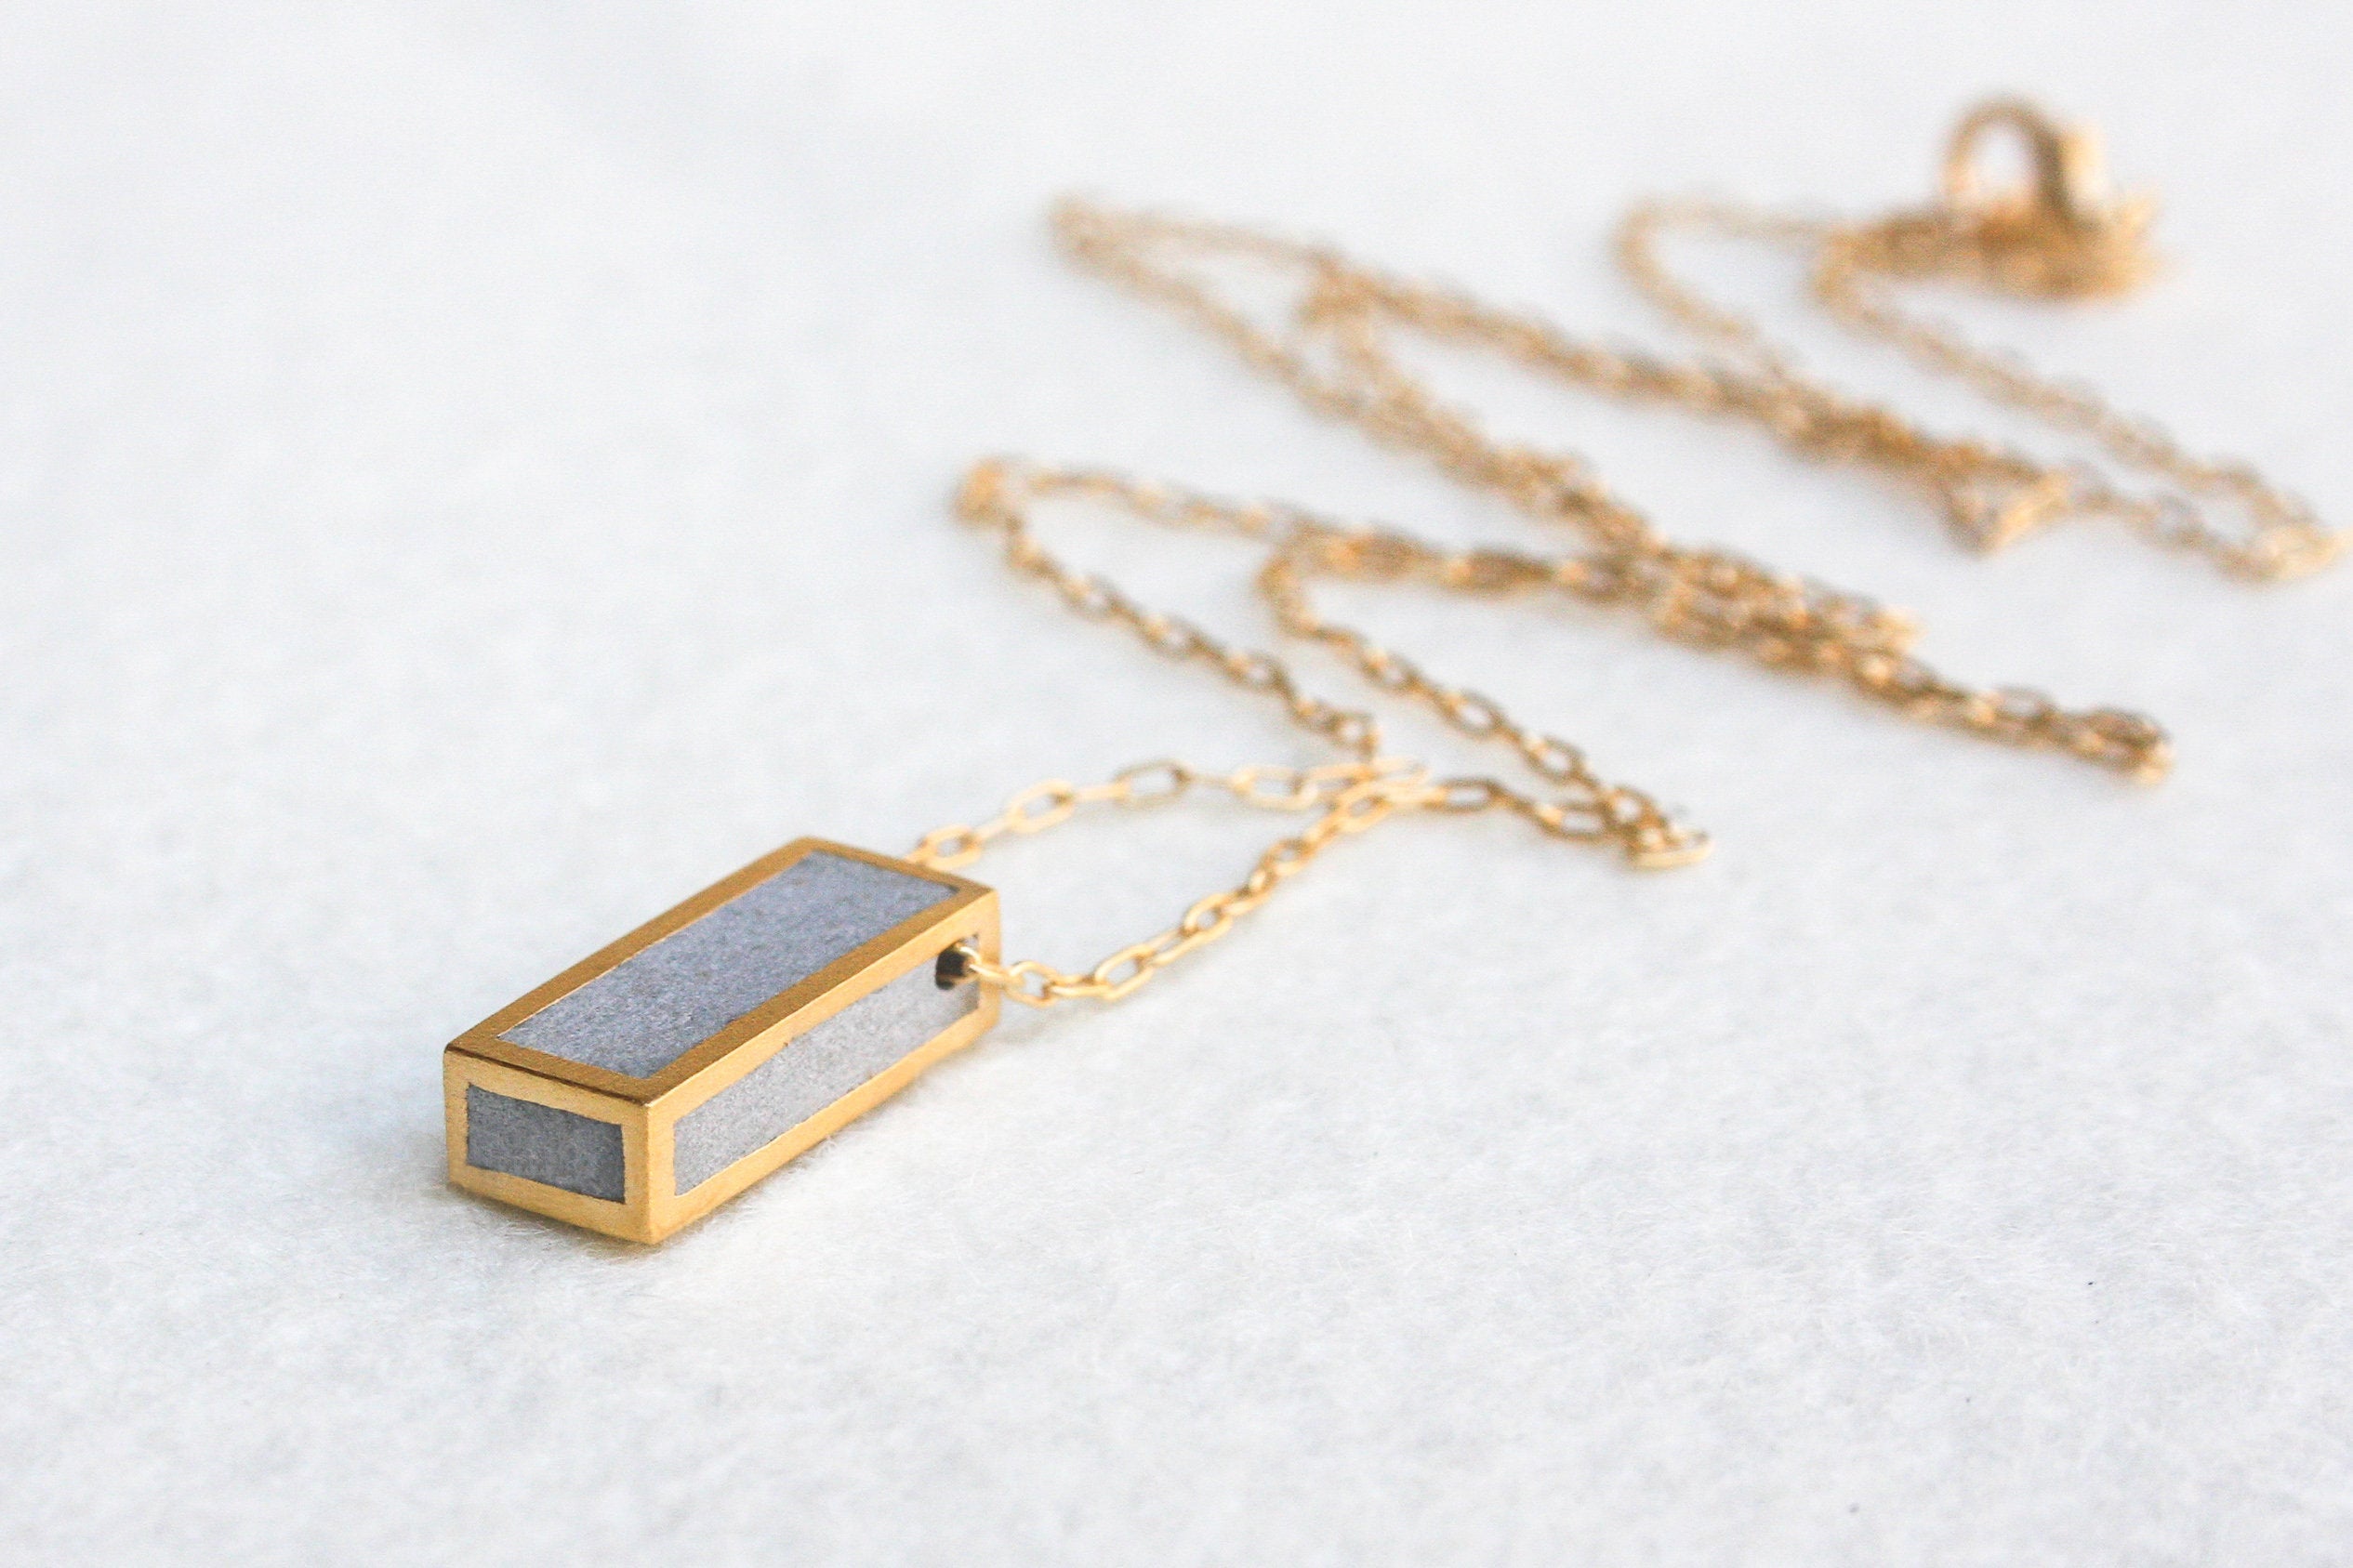 Geometric Rectangle Gold Pendant Inspired By Architecture - hs